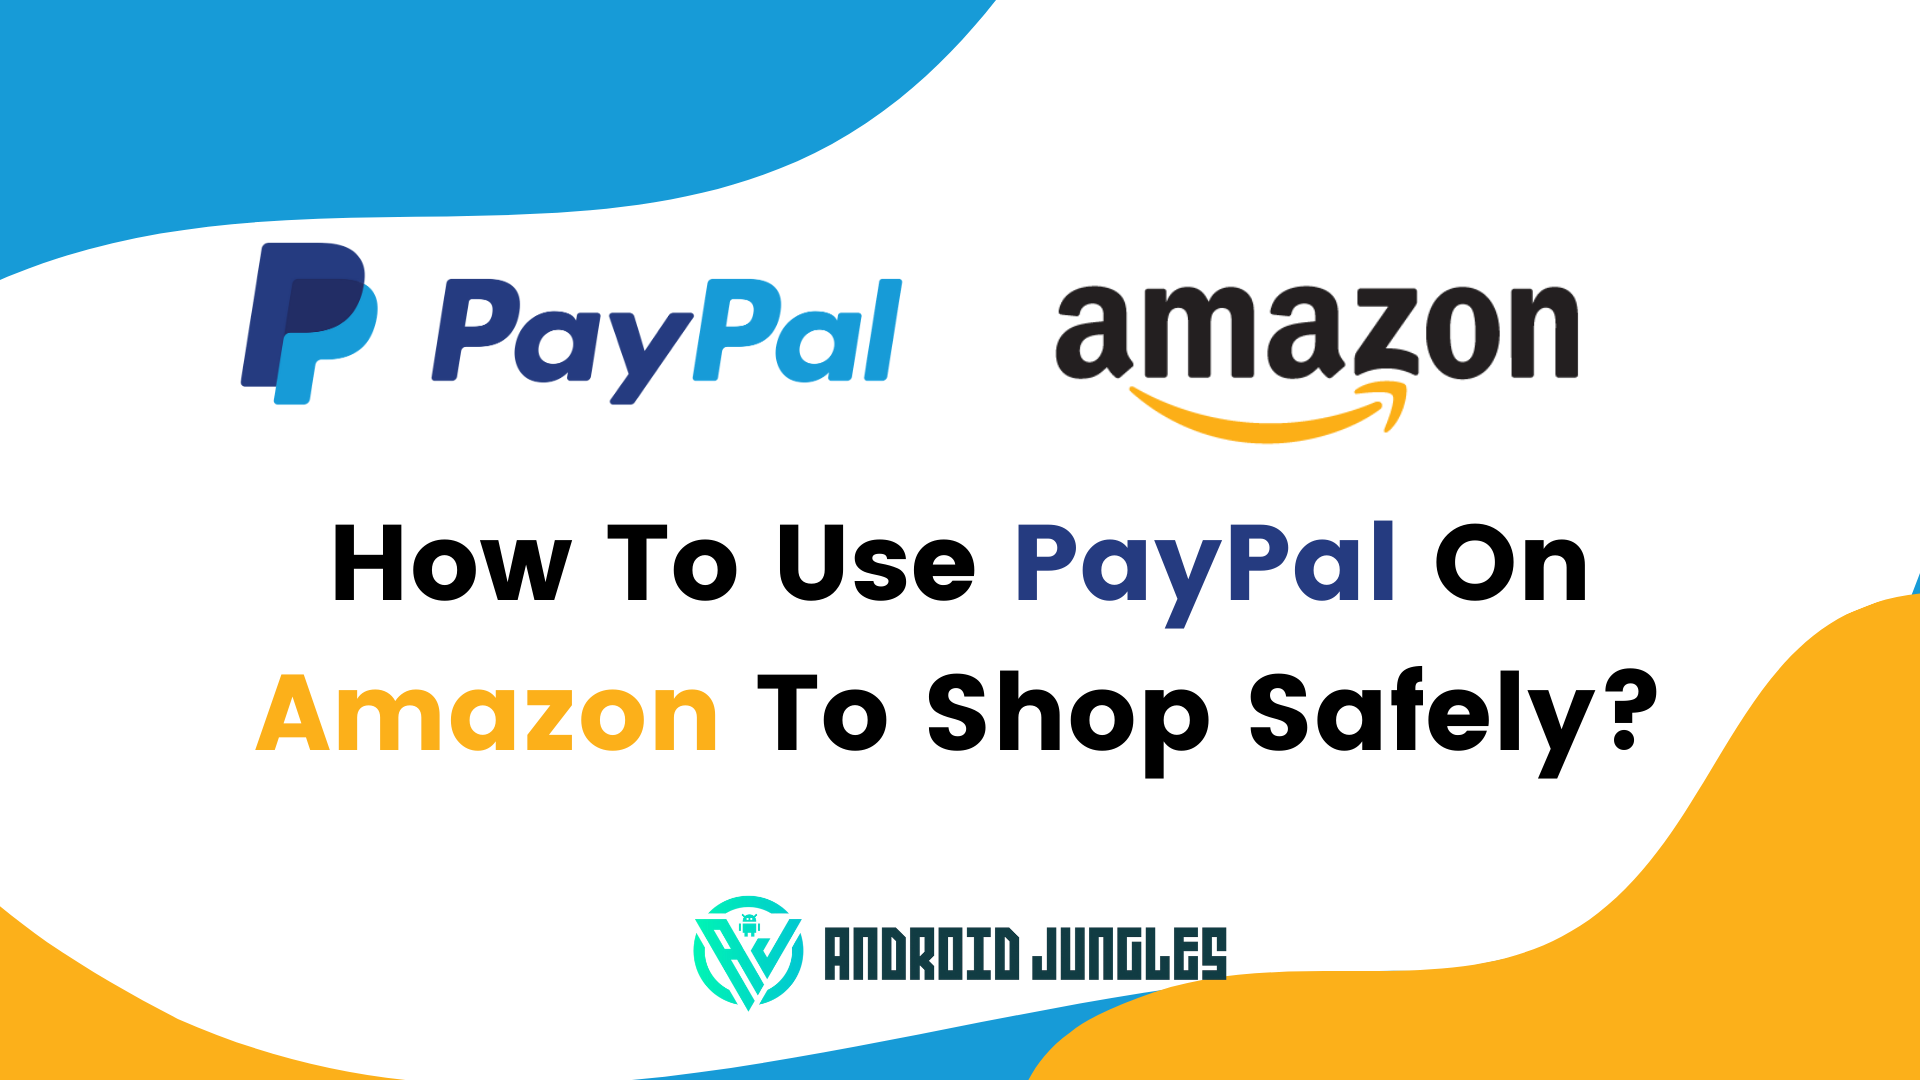 How To Use PayPal On Amazon To Shop Safely?